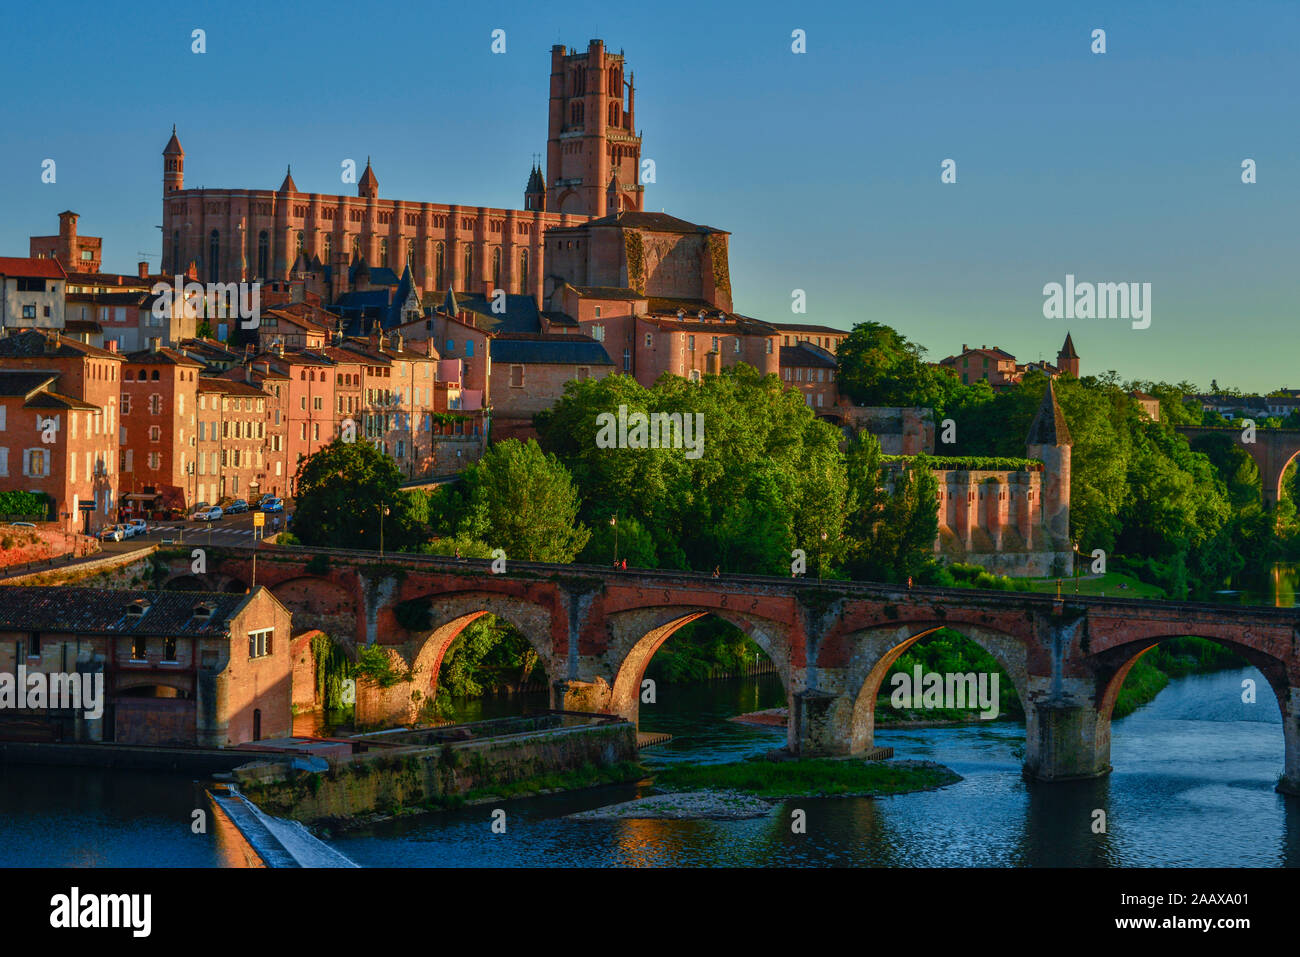 The southern French city of Albi is a major site associated with the 13th century Cathar heresies and the Albegensian Crusade in Occitanie. Stock Photo